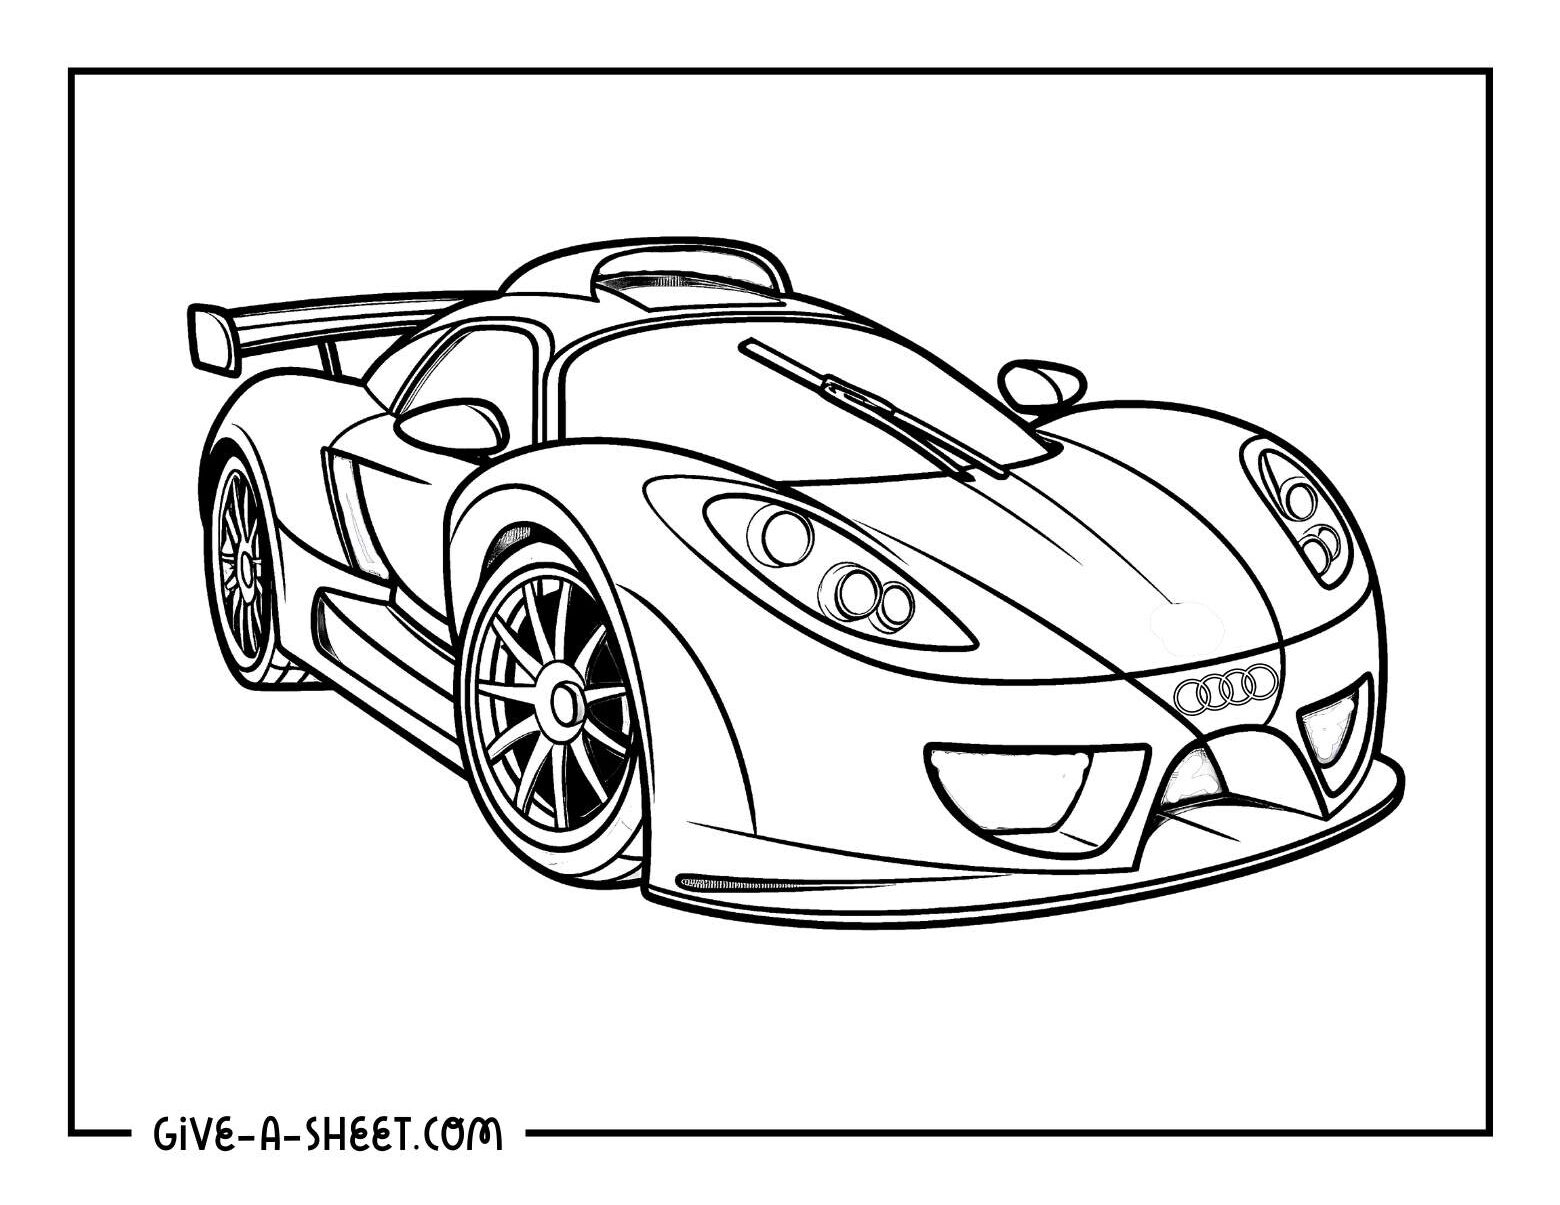 Audi race car outline to color in.